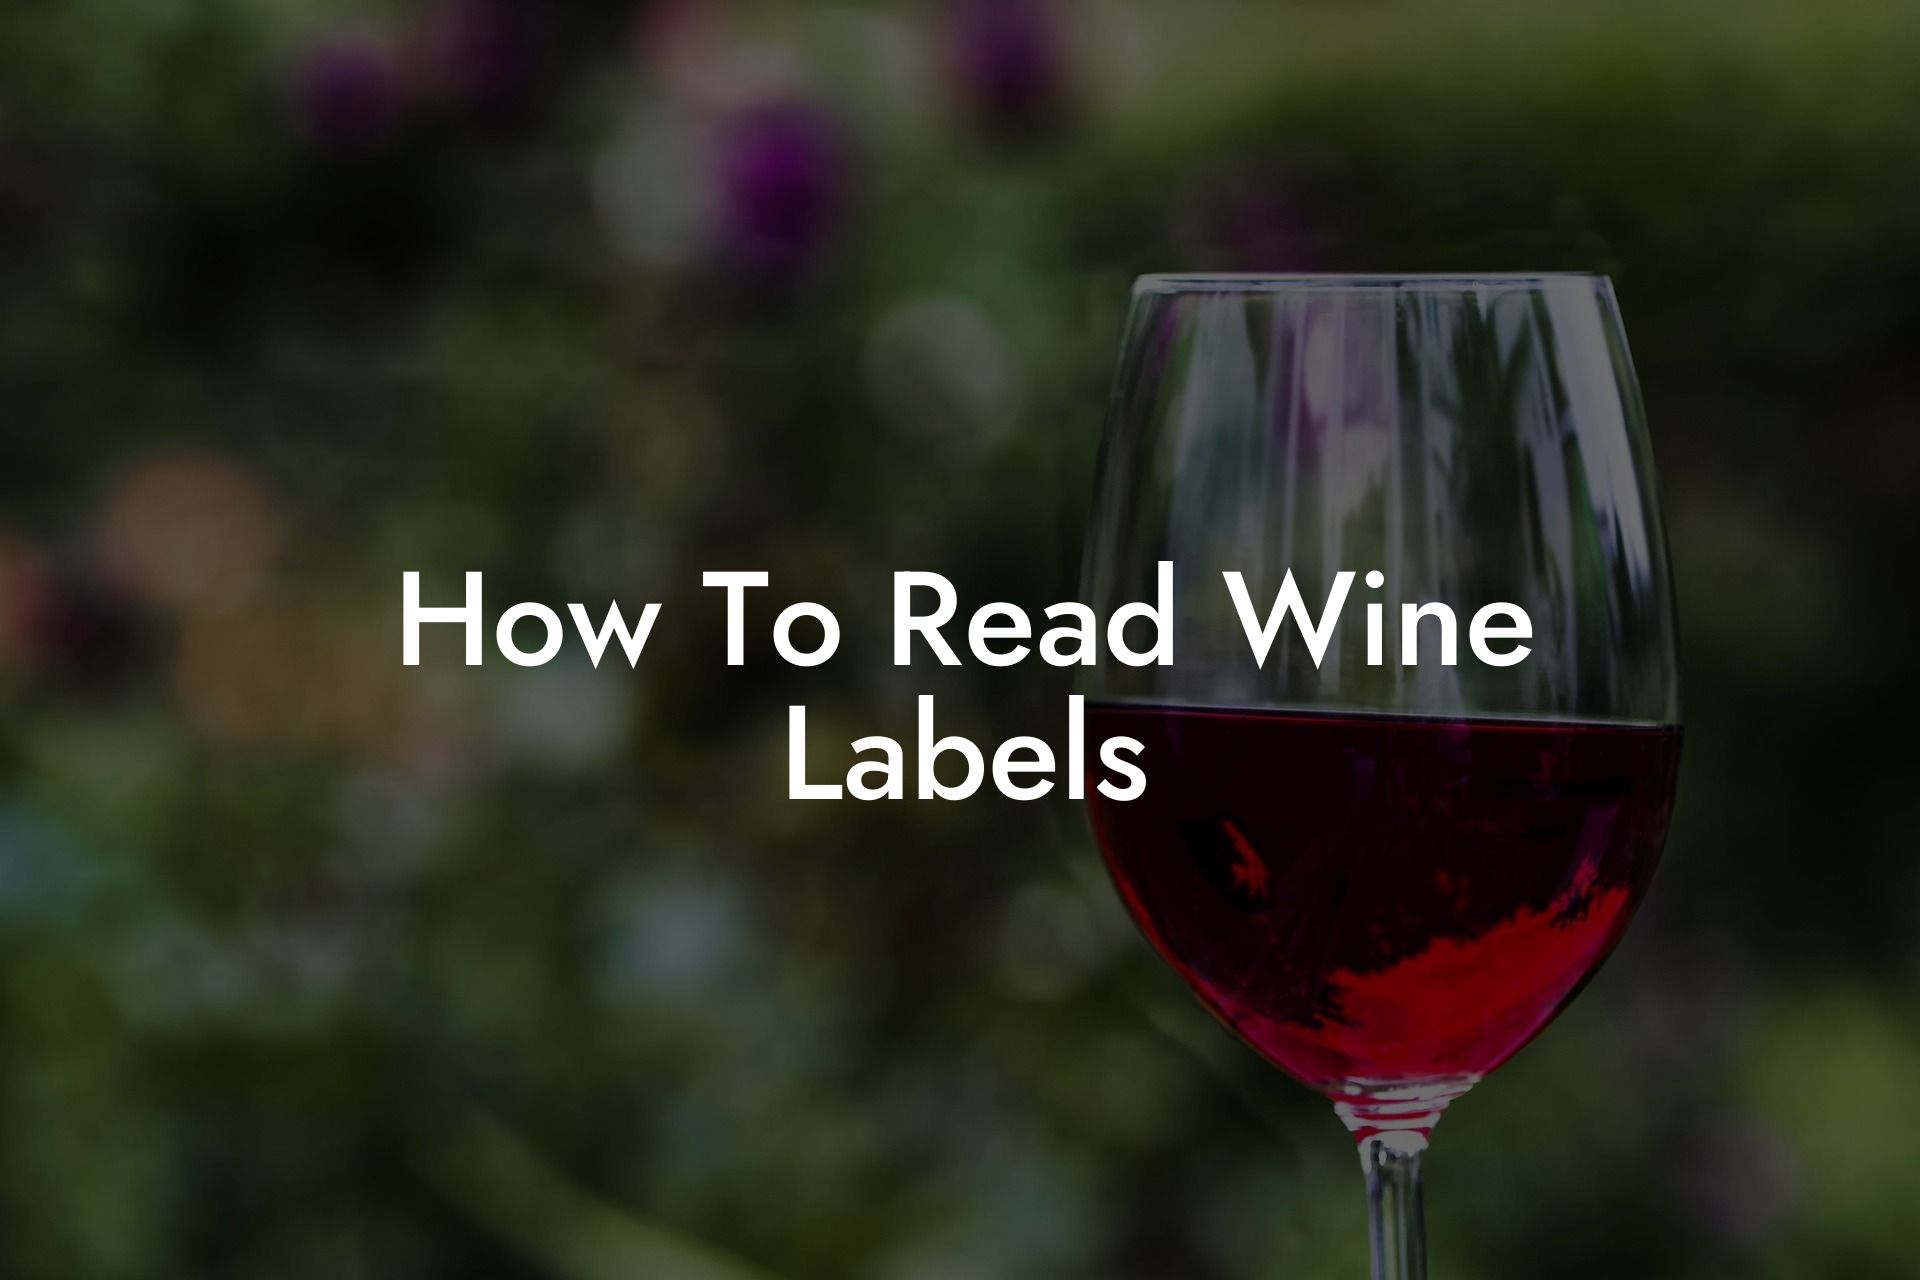 How To Read Wine Labels